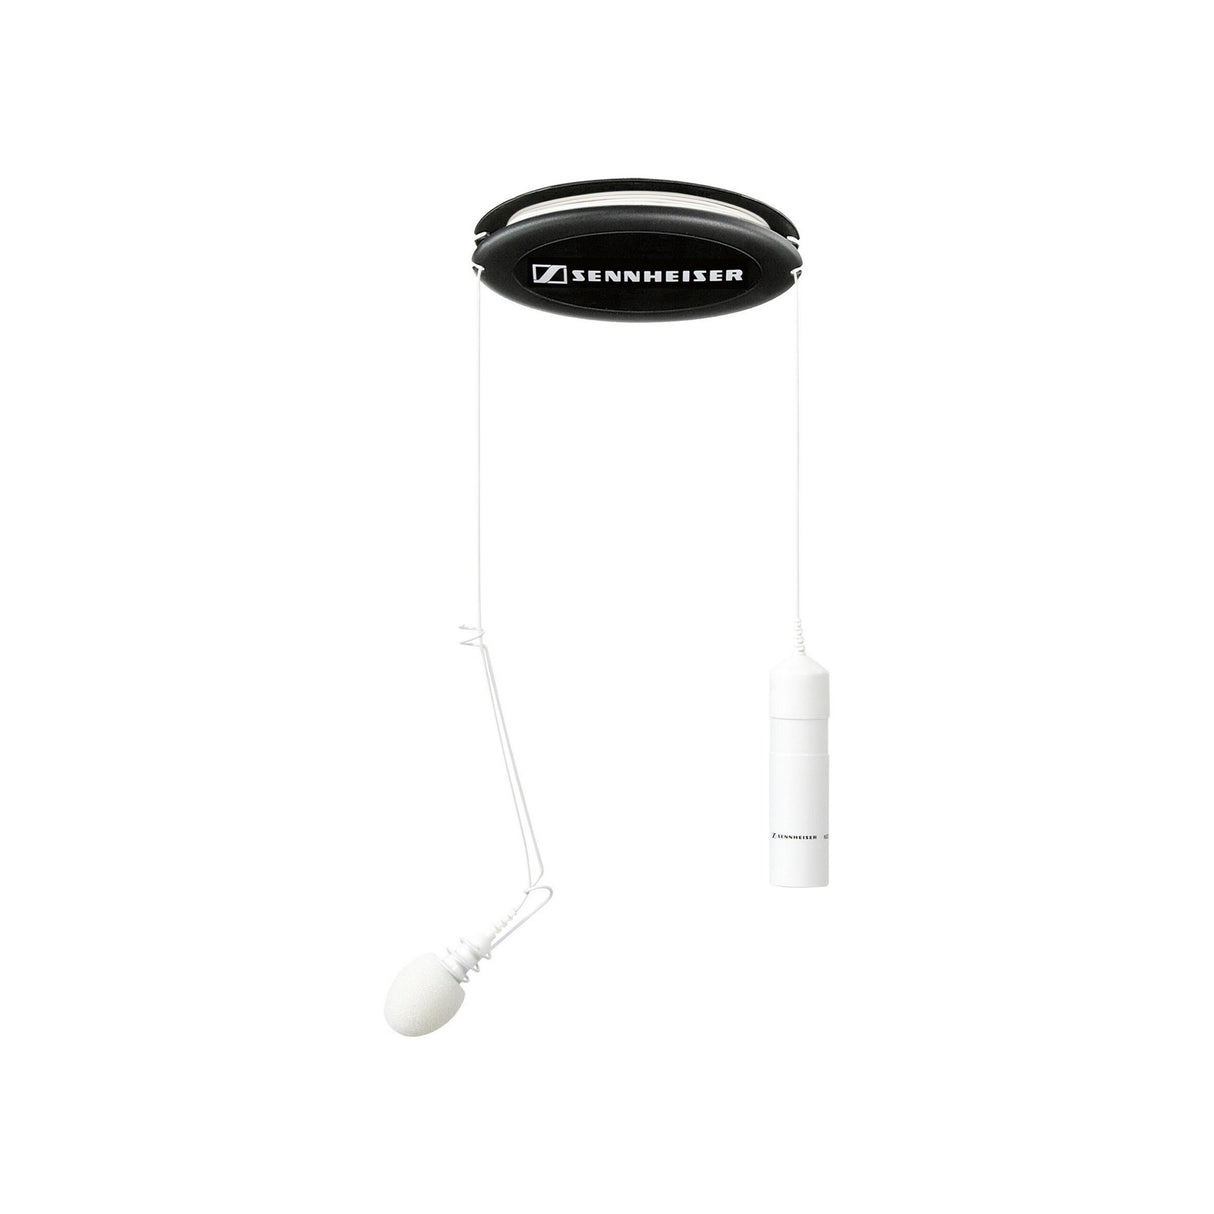 Sennheiser MZC 30 W IS Series Connecting Cable for ME 34, ME 35 and ME 36, 9 Meters, White